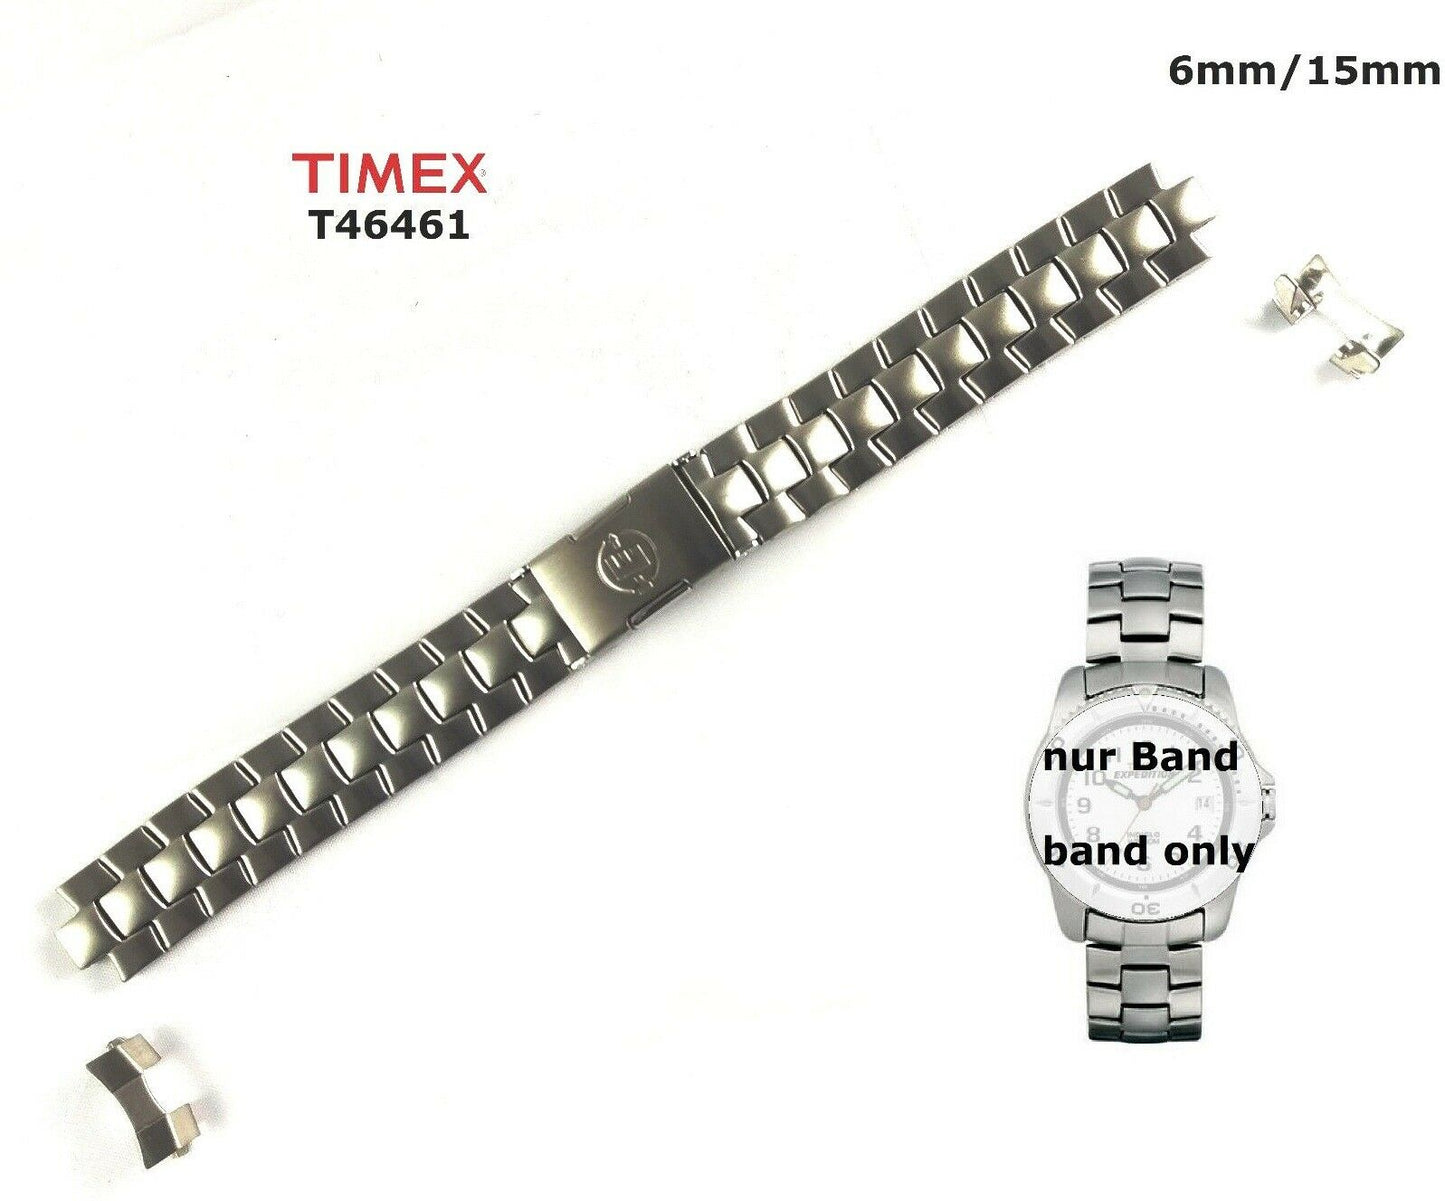 TIMEX Ersatzarmband T46461 EXPEDITION Outdoor Traditional - 15mm - passt T46471